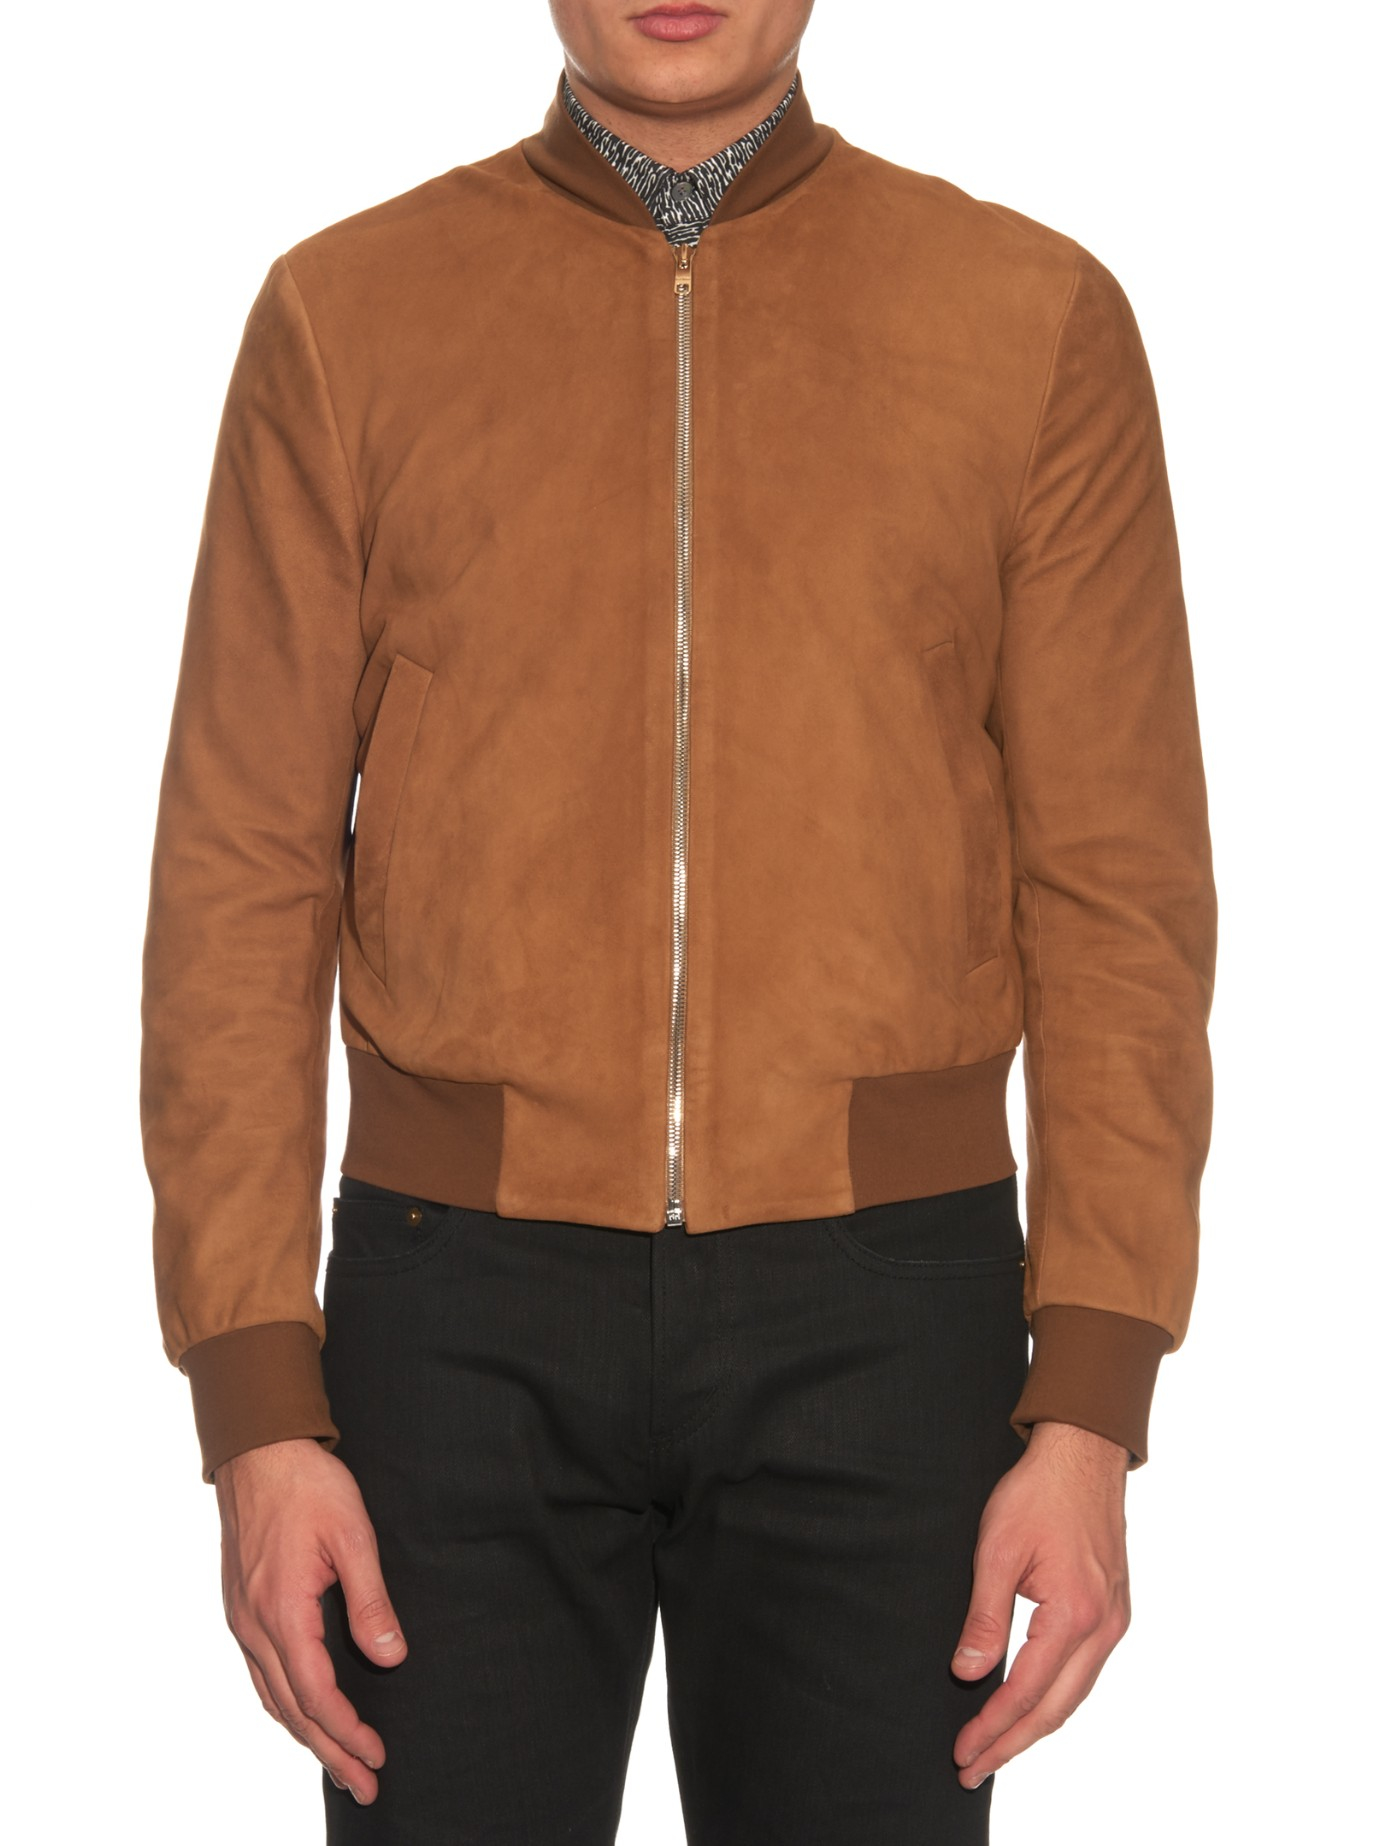 Paul Smith Suede Bomber Jacket in Brown for Men - Lyst